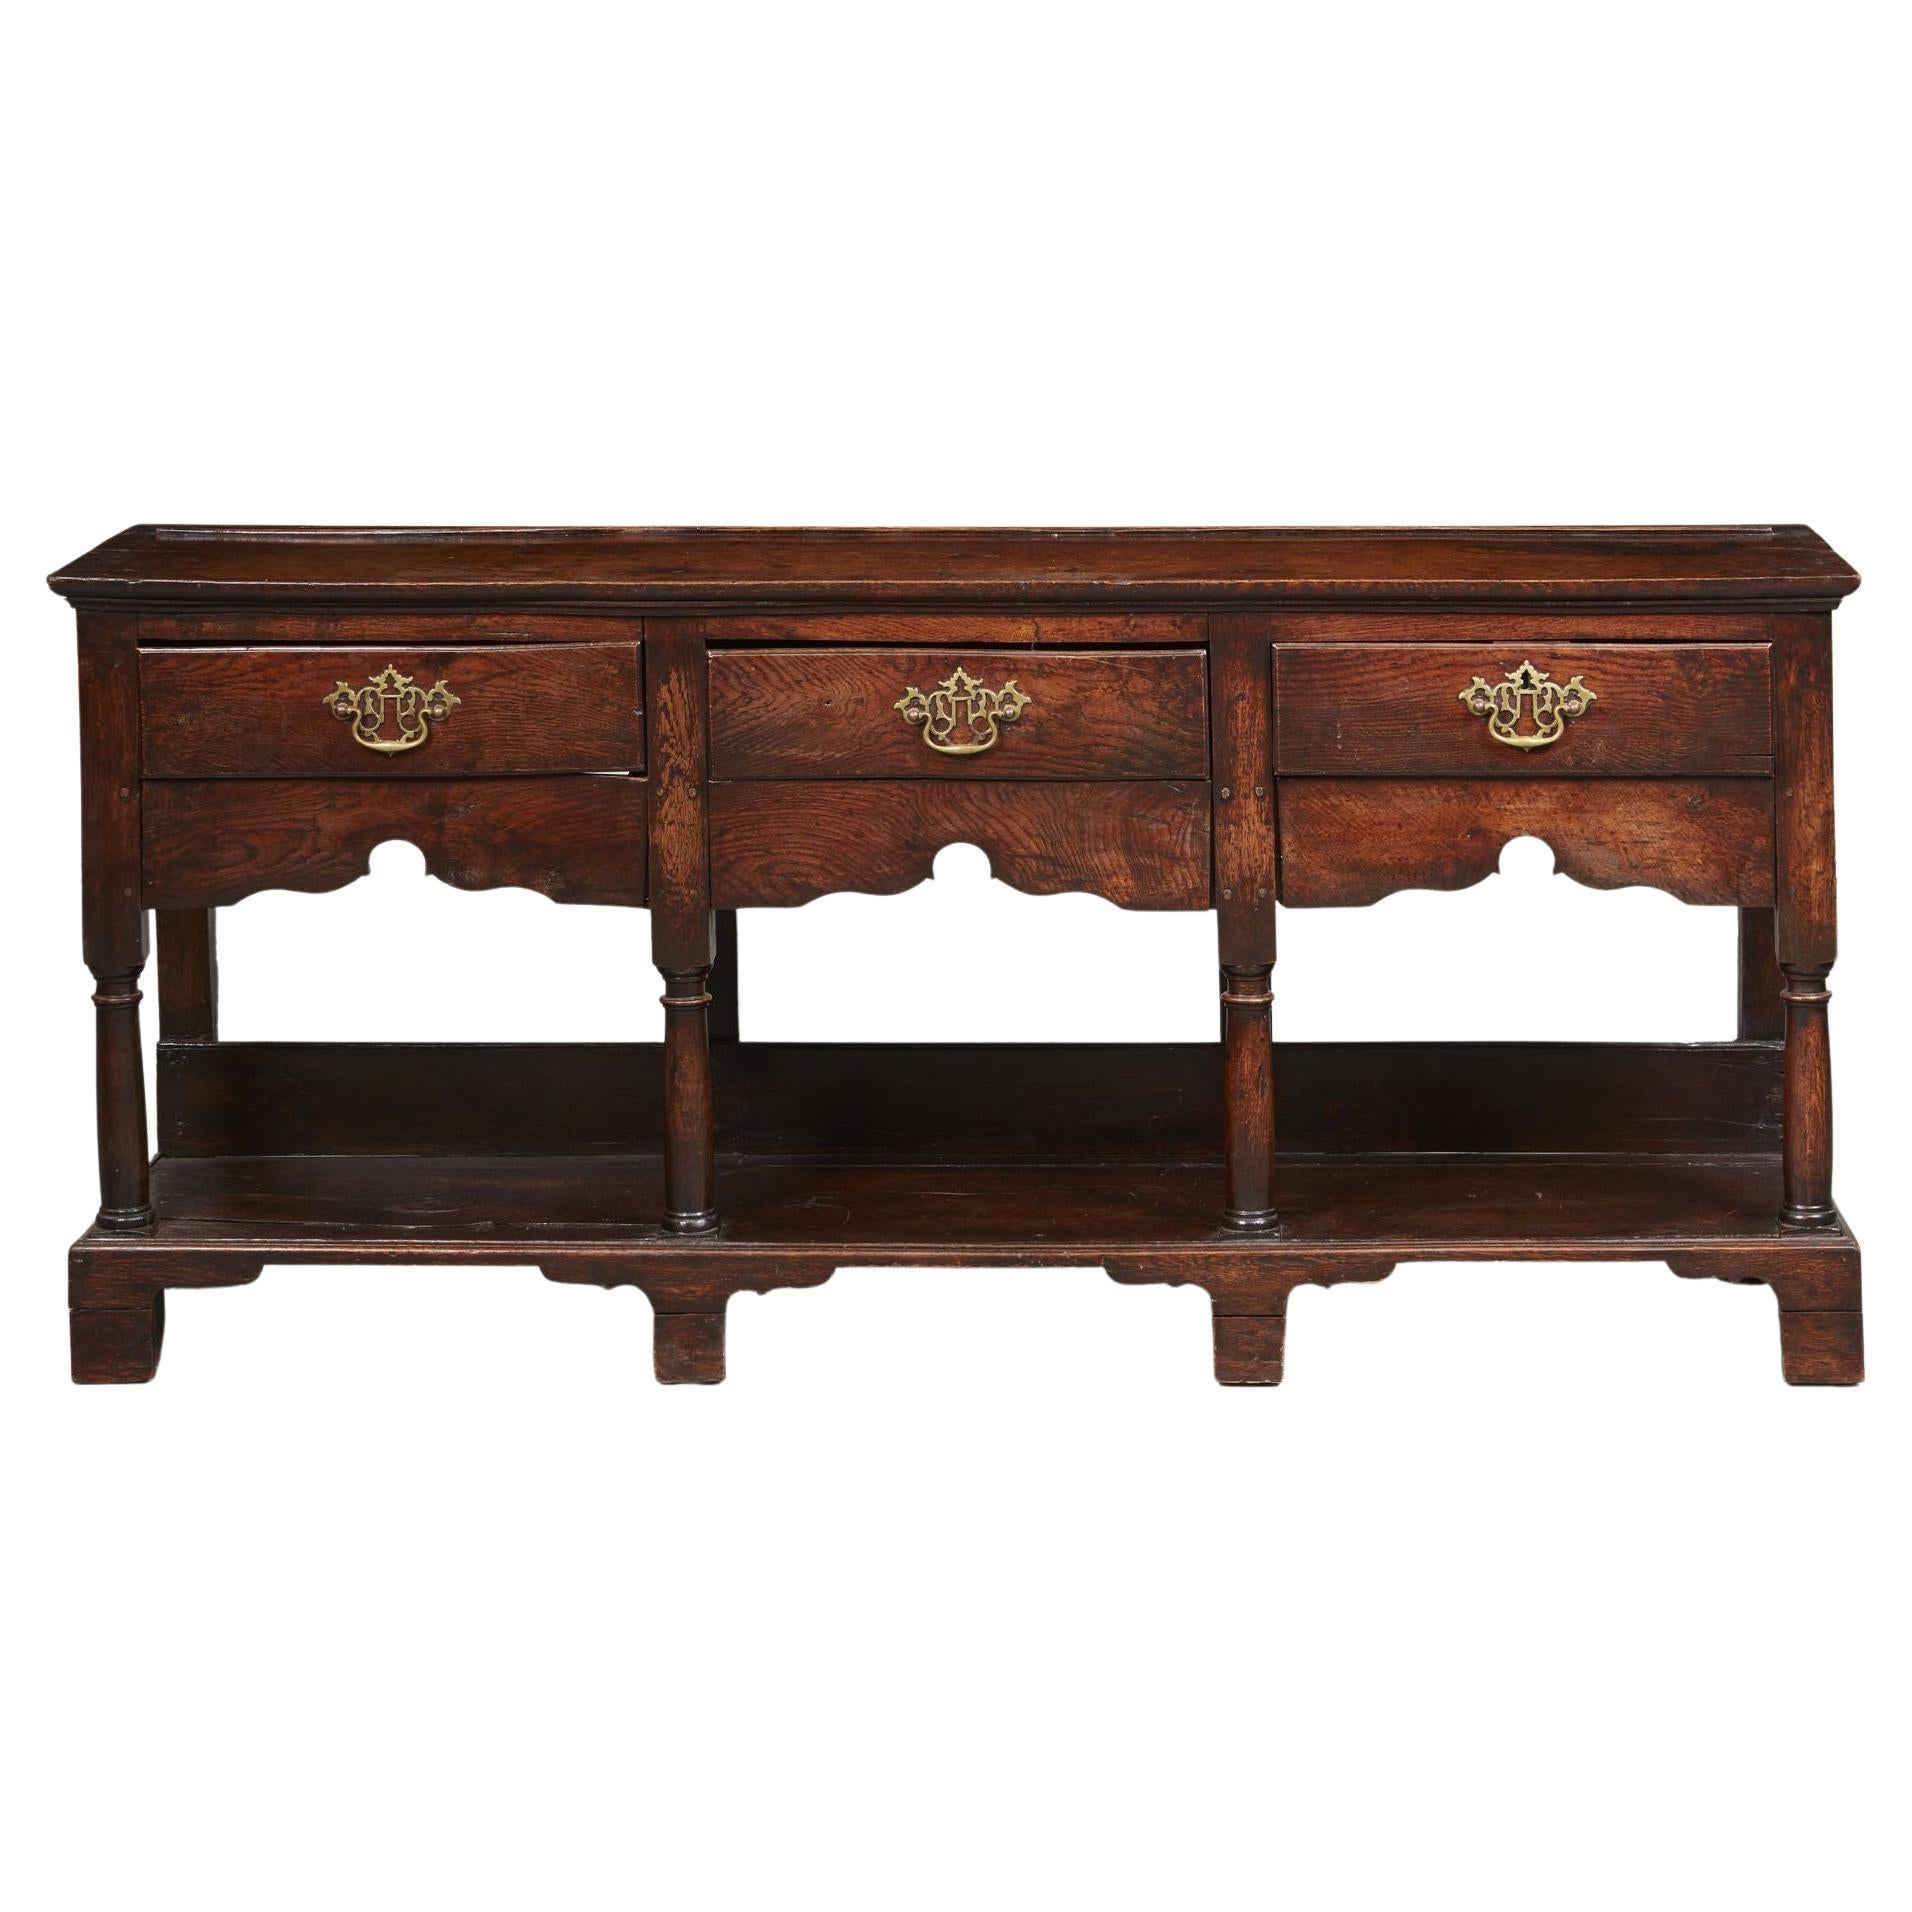 18th c. English Low Dresser with Potboard Base